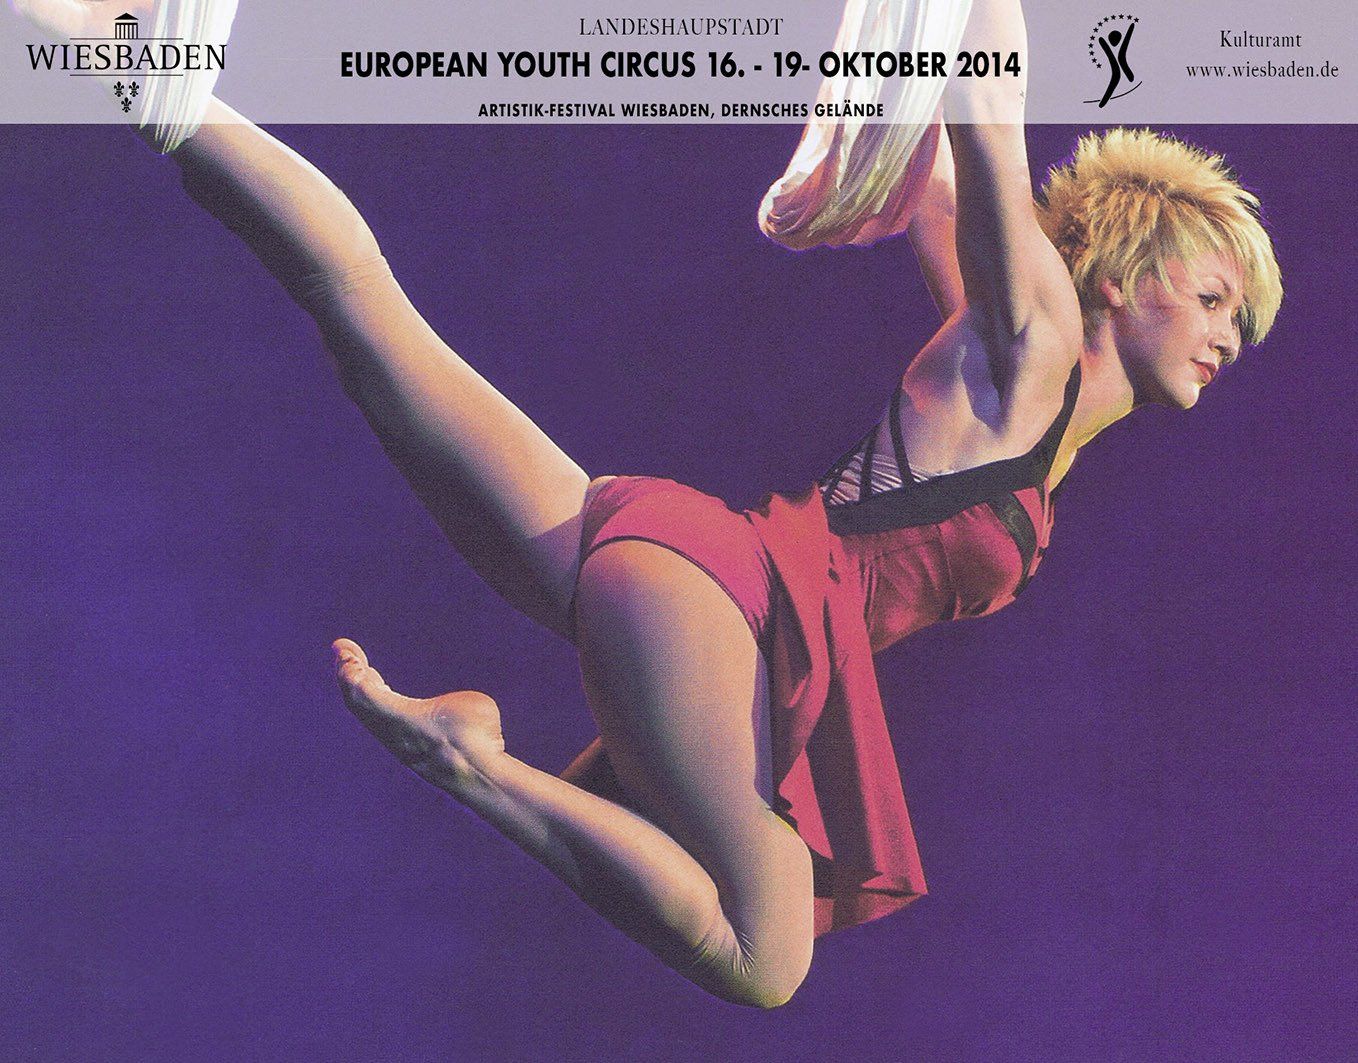 European Youth Circus Festival Wiesbaden directed by Sebastiano Toma